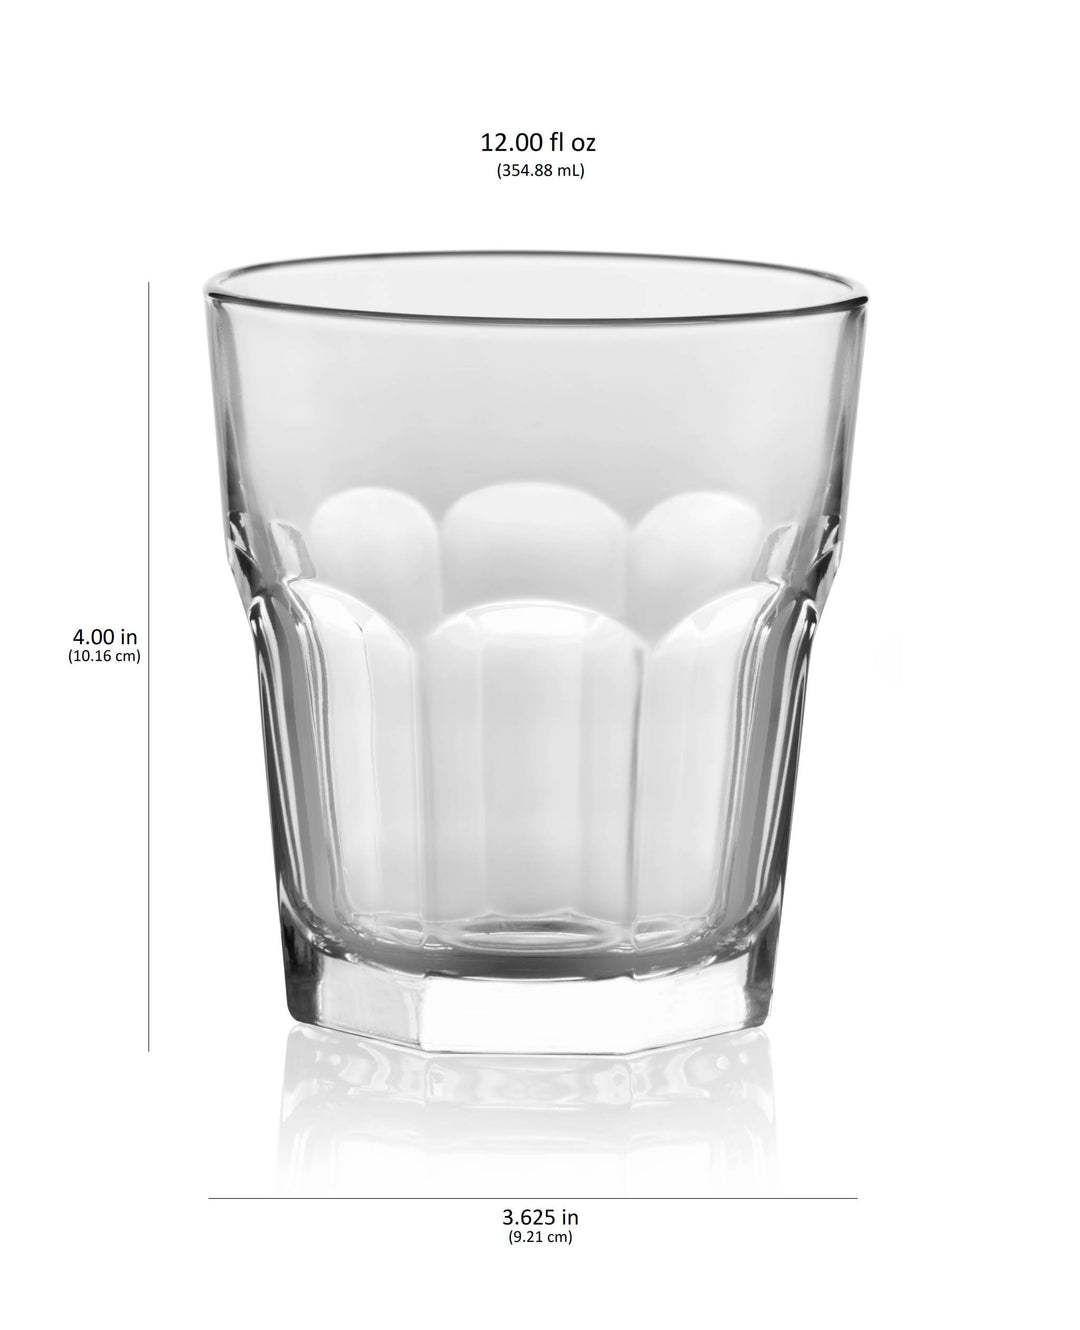 Includes 12, 12-ounce rocks glasses (4-inch height by 3.6-inch diameter)